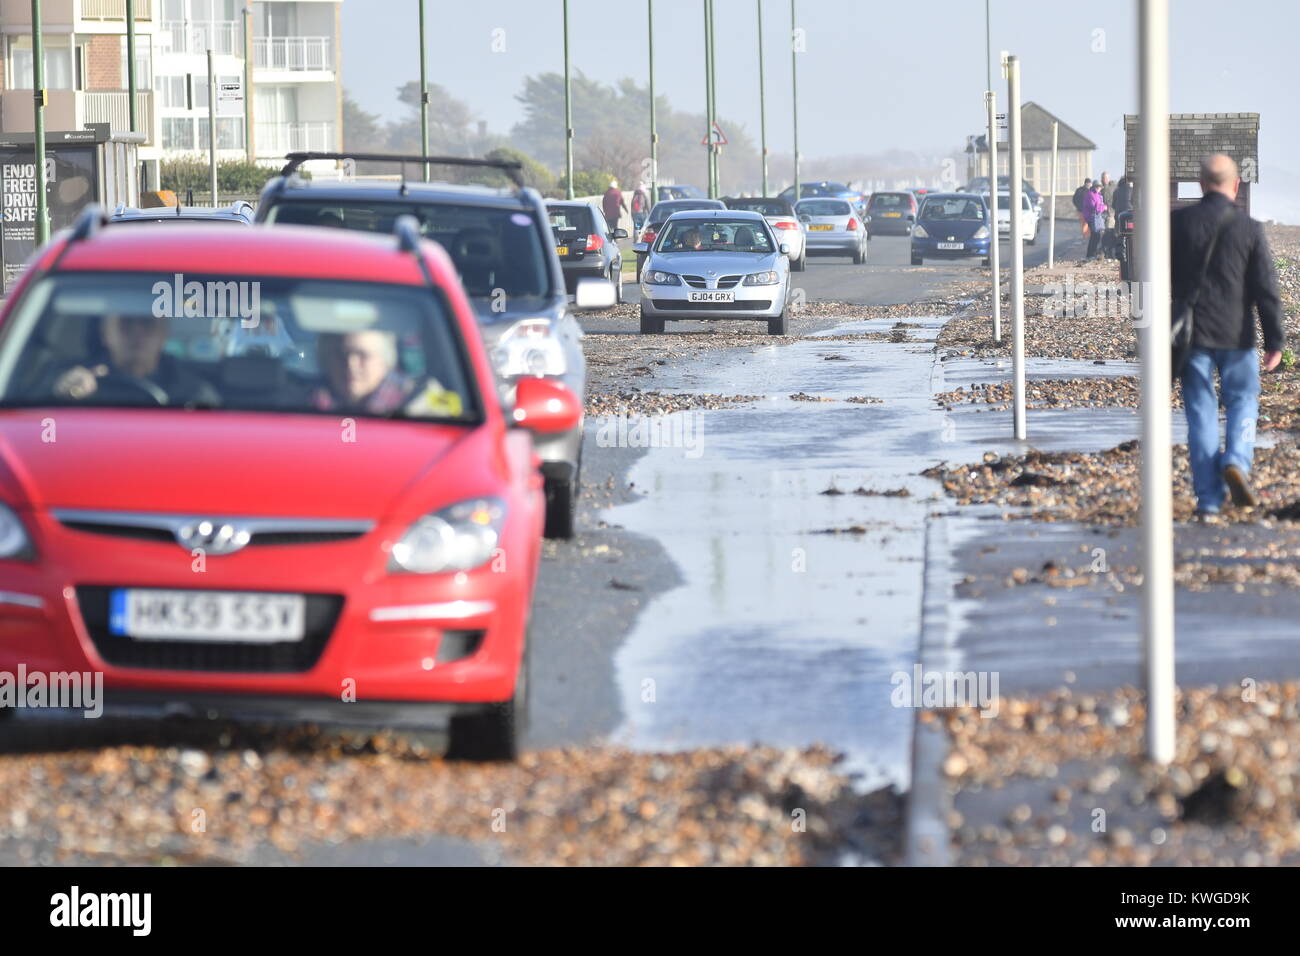 Sea Road, Rustington, West Sussex, England, UK. Wednesday 3rd January 2018. Cars battle through seawater and beach shingle on Sea Road in Rustington, after the windy conditions caused an abnormally high tide on the south coast. Credit: Geoff Smith/Alamy Live News Stock Photo